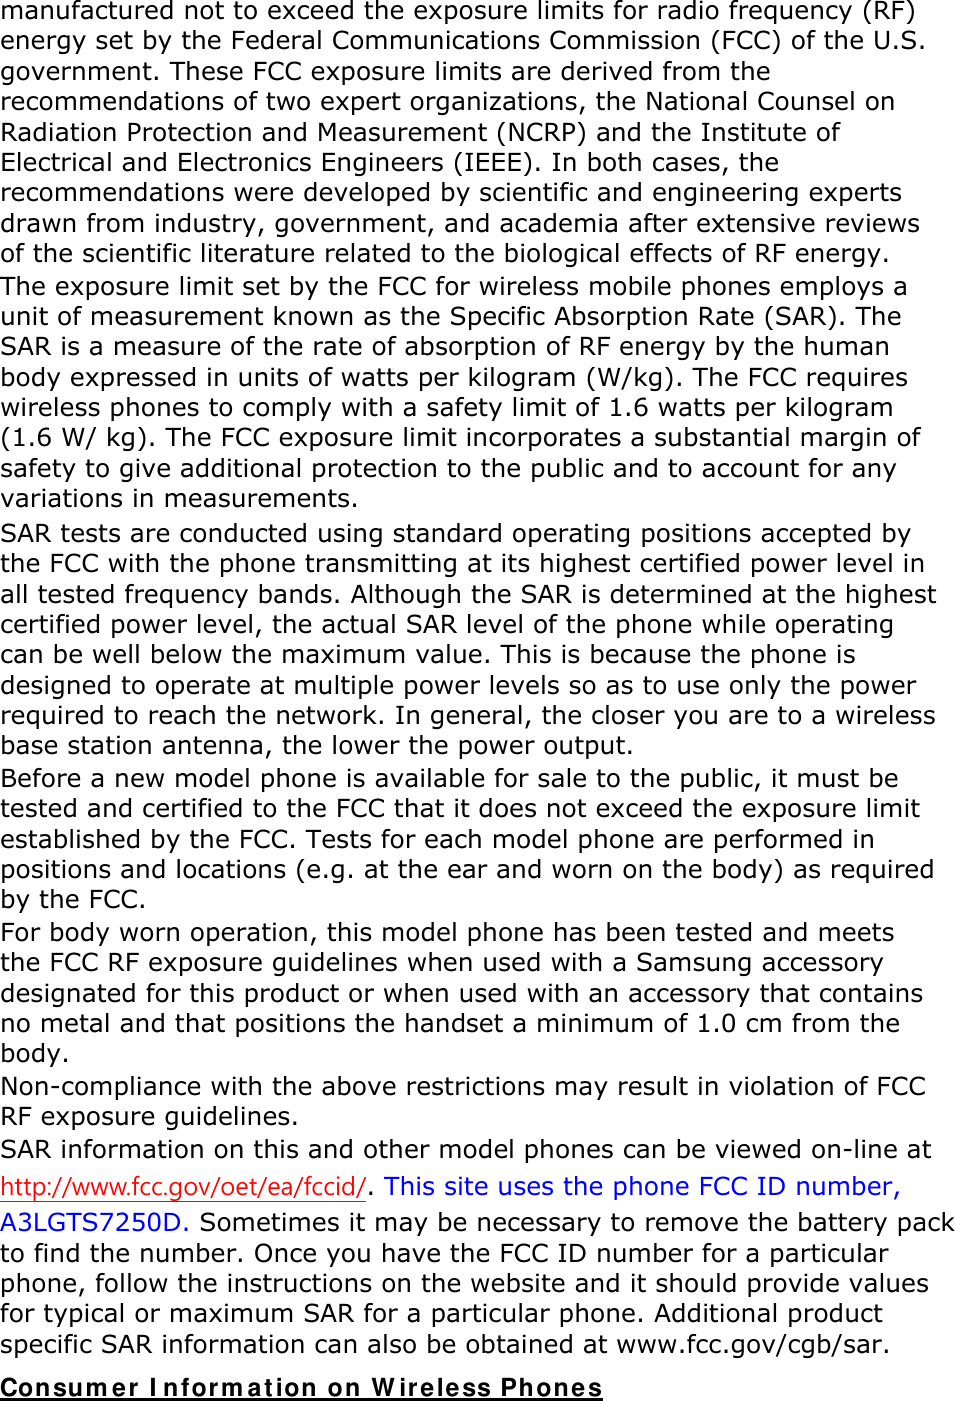 manufactured not to exceed the exposure limits for radio frequency (RF) energy set by the Federal Communications Commission (FCC) of the U.S. government. These FCC exposure limits are derived from the recommendations of two expert organizations, the National Counsel on Radiation Protection and Measurement (NCRP) and the Institute of Electrical and Electronics Engineers (IEEE). In both cases, the recommendations were developed by scientific and engineering experts drawn from industry, government, and academia after extensive reviews of the scientific literature related to the biological effects of RF energy. The exposure limit set by the FCC for wireless mobile phones employs a unit of measurement known as the Specific Absorption Rate (SAR). The SAR is a measure of the rate of absorption of RF energy by the human body expressed in units of watts per kilogram (W/kg). The FCC requires wireless phones to comply with a safety limit of 1.6 watts per kilogram (1.6 W/ kg). The FCC exposure limit incorporates a substantial margin of safety to give additional protection to the public and to account for any variations in measurements. SAR tests are conducted using standard operating positions accepted by the FCC with the phone transmitting at its highest certified power level in all tested frequency bands. Although the SAR is determined at the highest certified power level, the actual SAR level of the phone while operating can be well below the maximum value. This is because the phone is designed to operate at multiple power levels so as to use only the power required to reach the network. In general, the closer you are to a wireless base station antenna, the lower the power output. Before a new model phone is available for sale to the public, it must be tested and certified to the FCC that it does not exceed the exposure limit established by the FCC. Tests for each model phone are performed in positions and locations (e.g. at the ear and worn on the body) as required by the FCC.     For body worn operation, this model phone has been tested and meets the FCC RF exposure guidelines when used with a Samsung accessory designated for this product or when used with an accessory that contains no metal and that positions the handset a minimum of 1.0 cm from the body.  Non-compliance with the above restrictions may result in violation of FCC RF exposure guidelines. SAR information on this and other model phones can be viewed on-line at http://www.fcc.gov/oet/ea/fccid/. This site uses the phone FCC ID number, A3LGTS7250D. Sometimes it may be necessary to remove the battery pack to find the number. Once you have the FCC ID number for a particular phone, follow the instructions on the website and it should provide values for typical or maximum SAR for a particular phone. Additional product specific SAR information can also be obtained at www.fcc.gov/cgb/sar. Consumer Information on Wireless Phones 